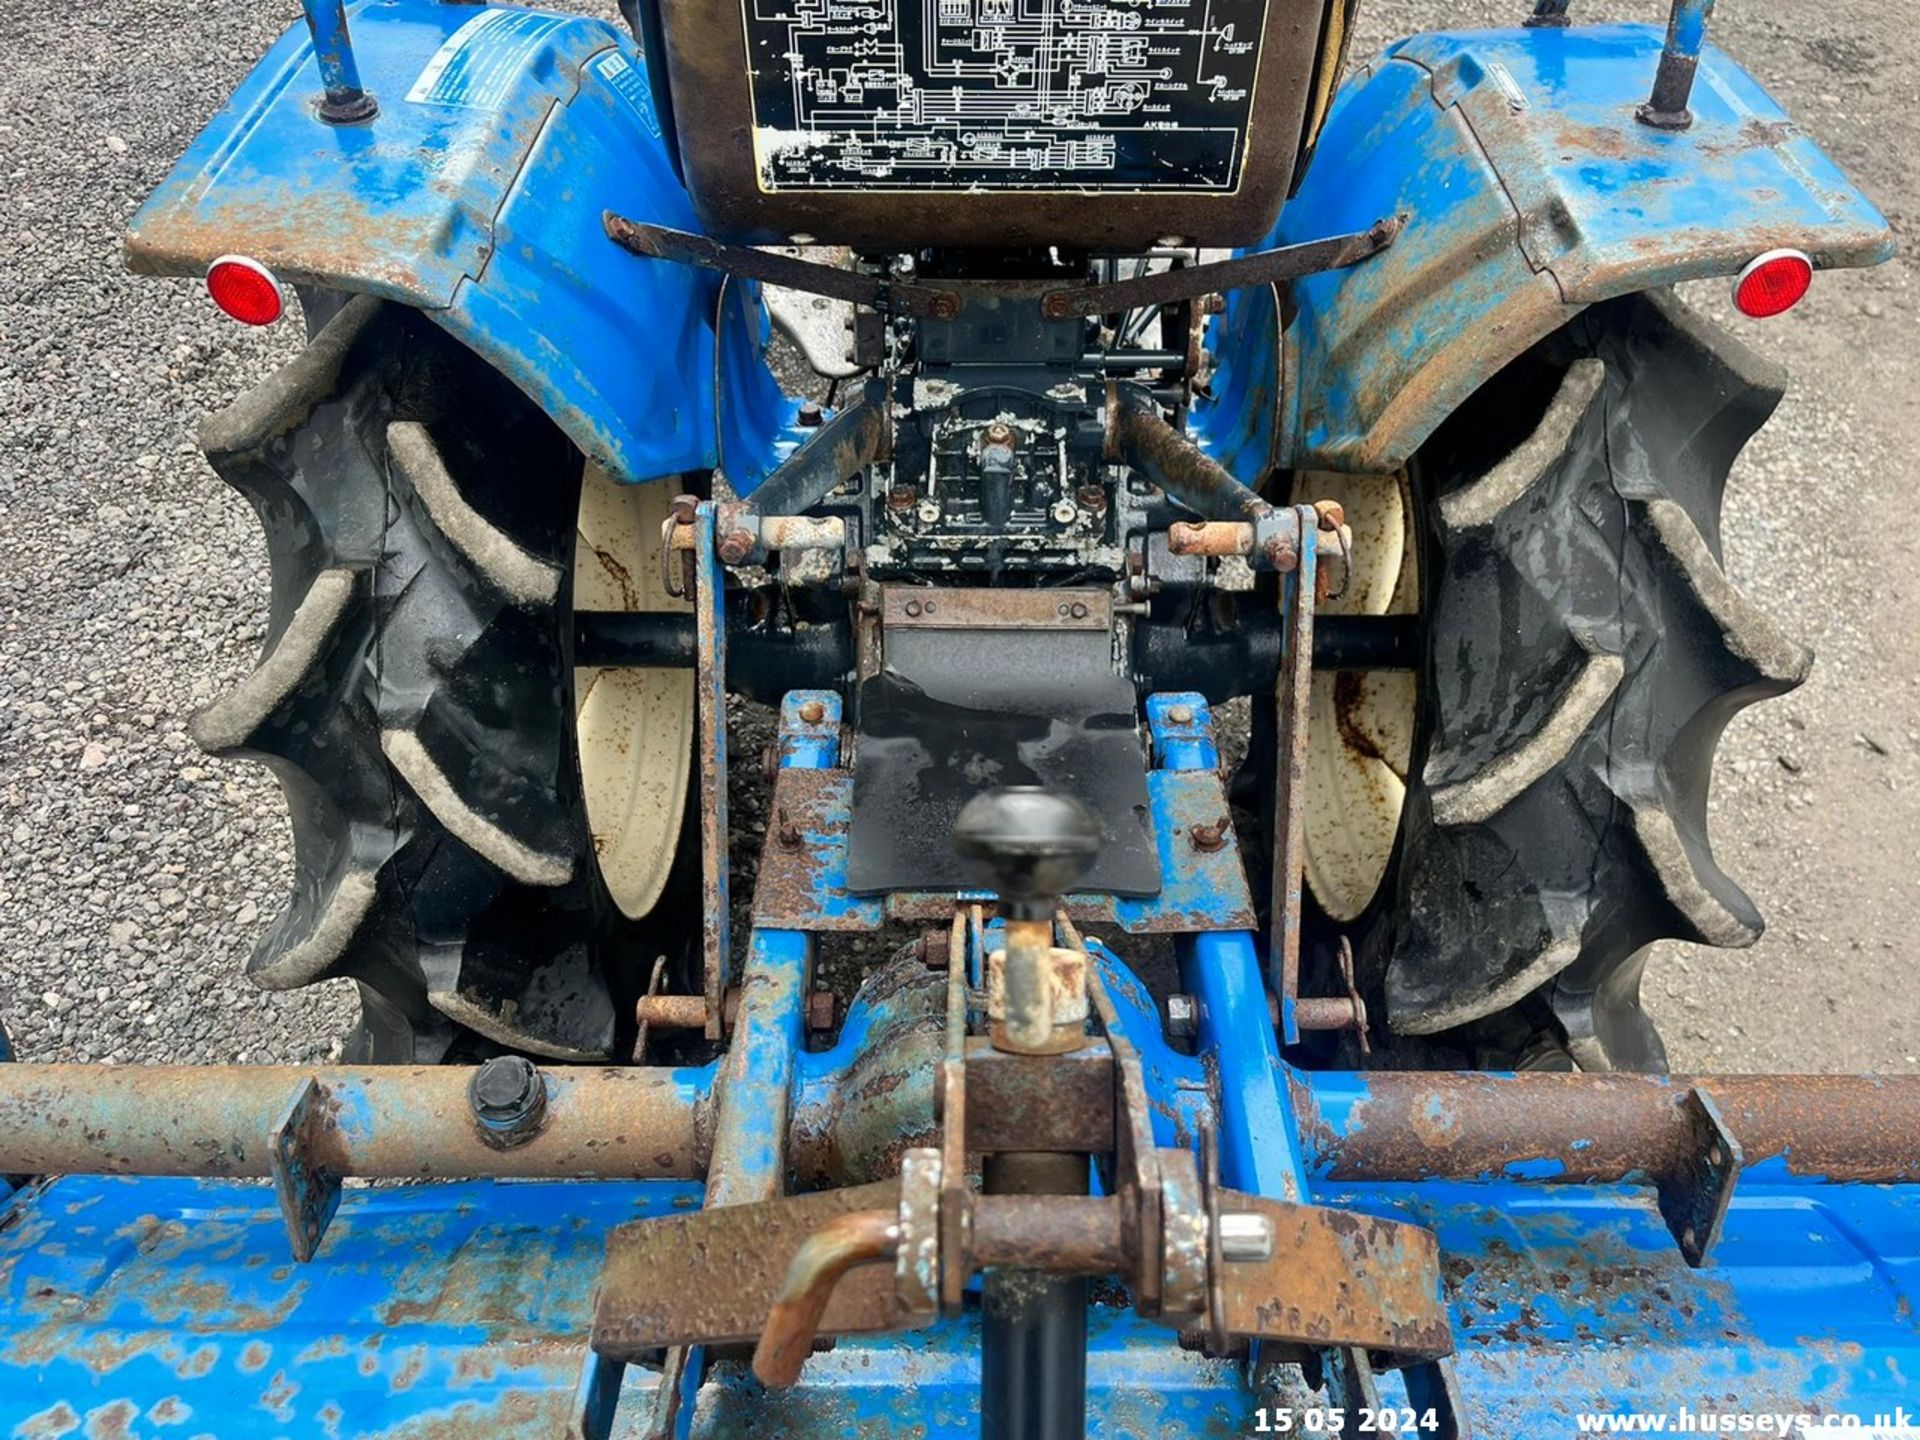 ISEKI 155 4WD COMPACT TRACTOR C.W ROTAVATOR R&D TINES TURN LIFT ARMS LIFT - Image 10 of 15